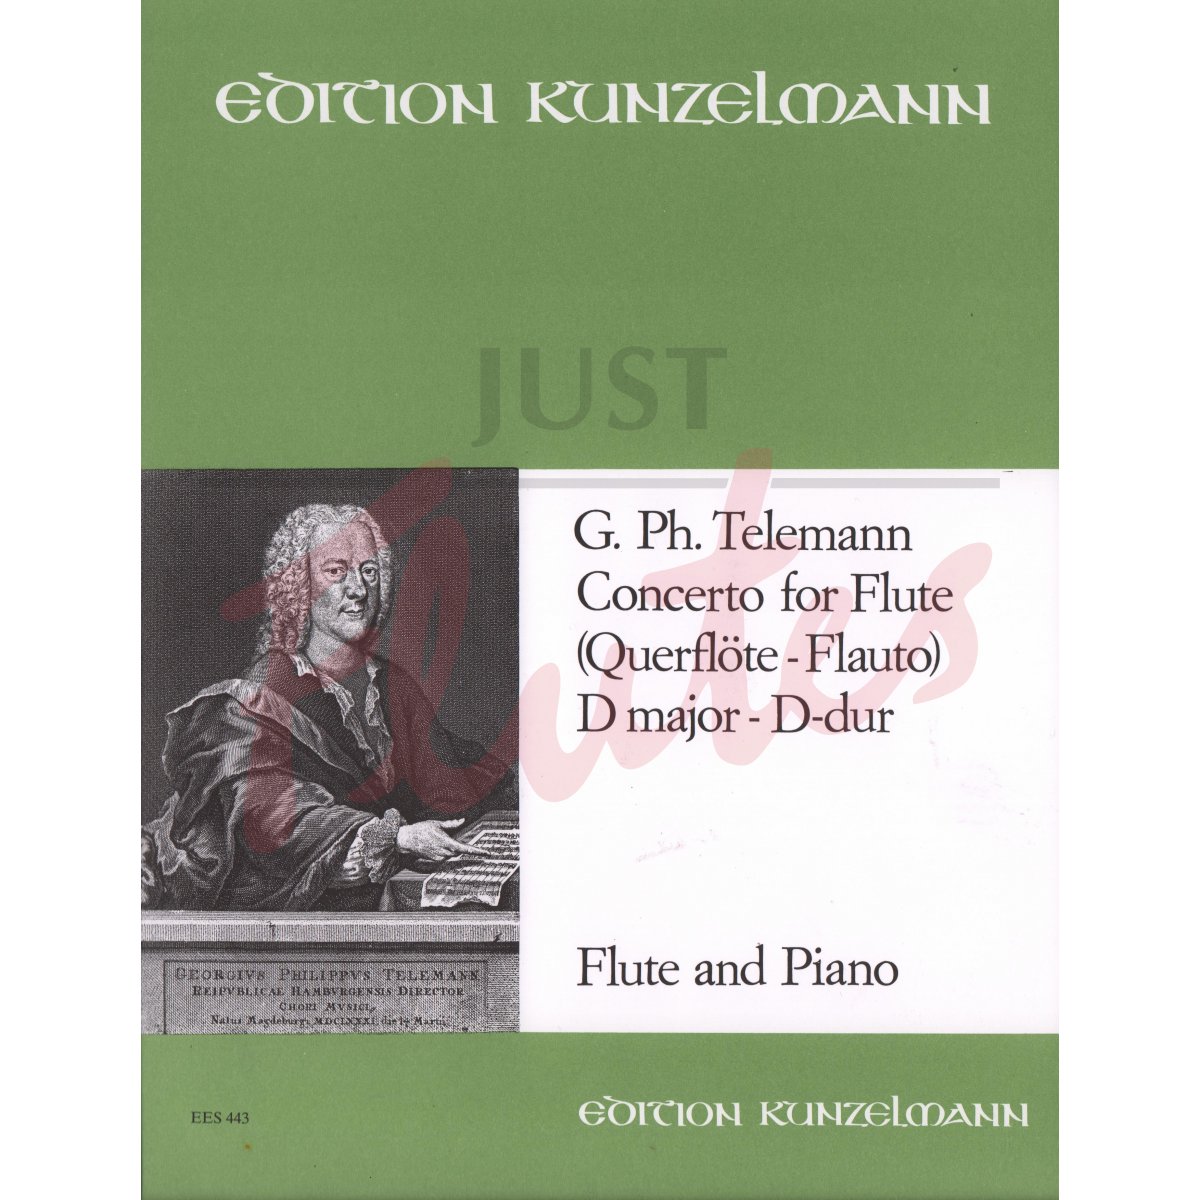 Concerto in D major for Flute and Piano